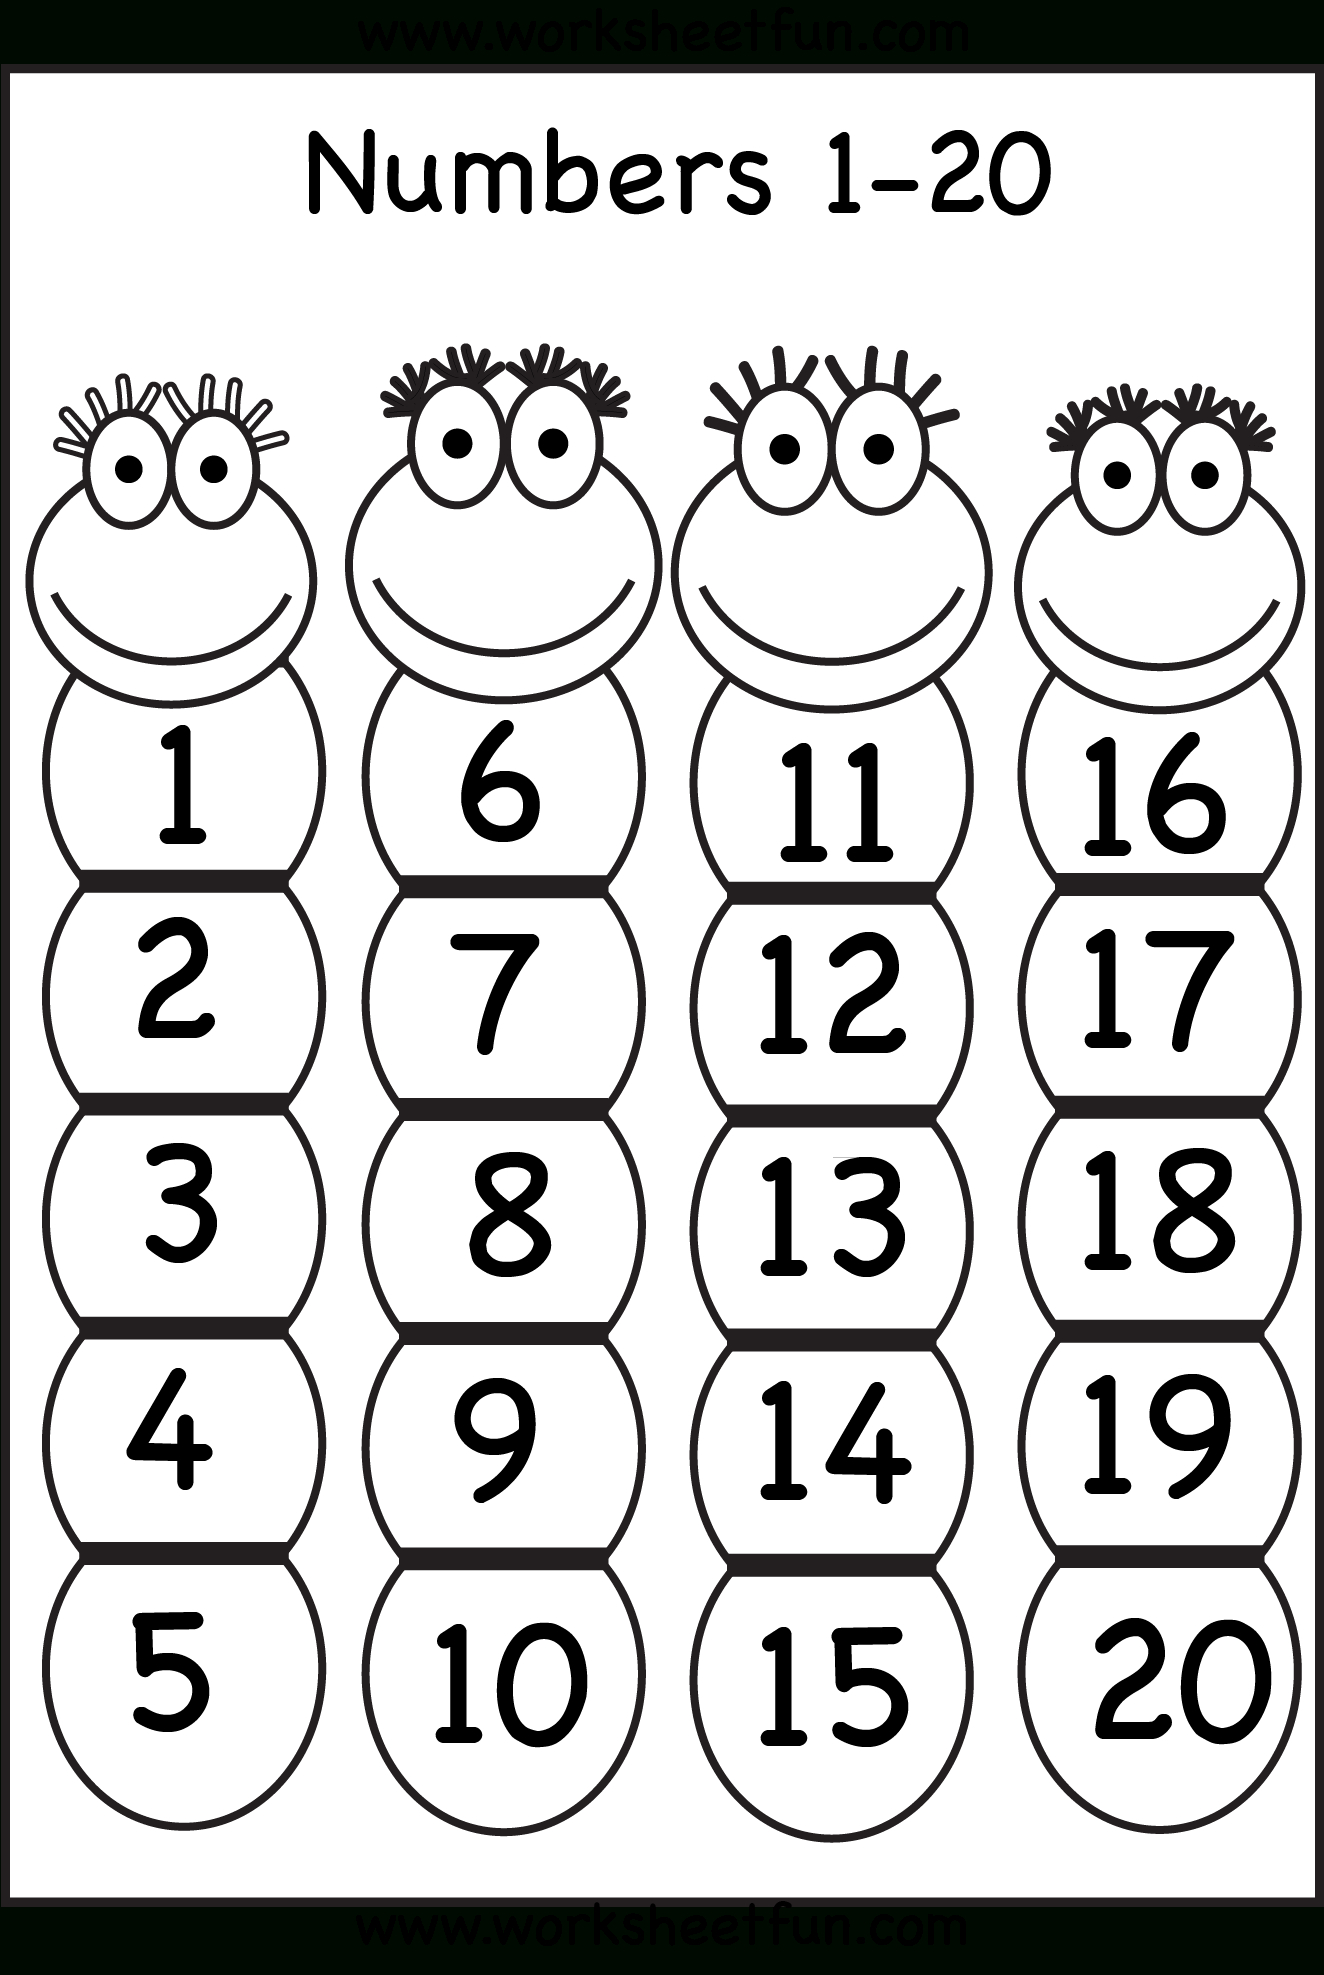 Numbers - Lessons - Tes Teach - Free Printable Number Chart 1 20